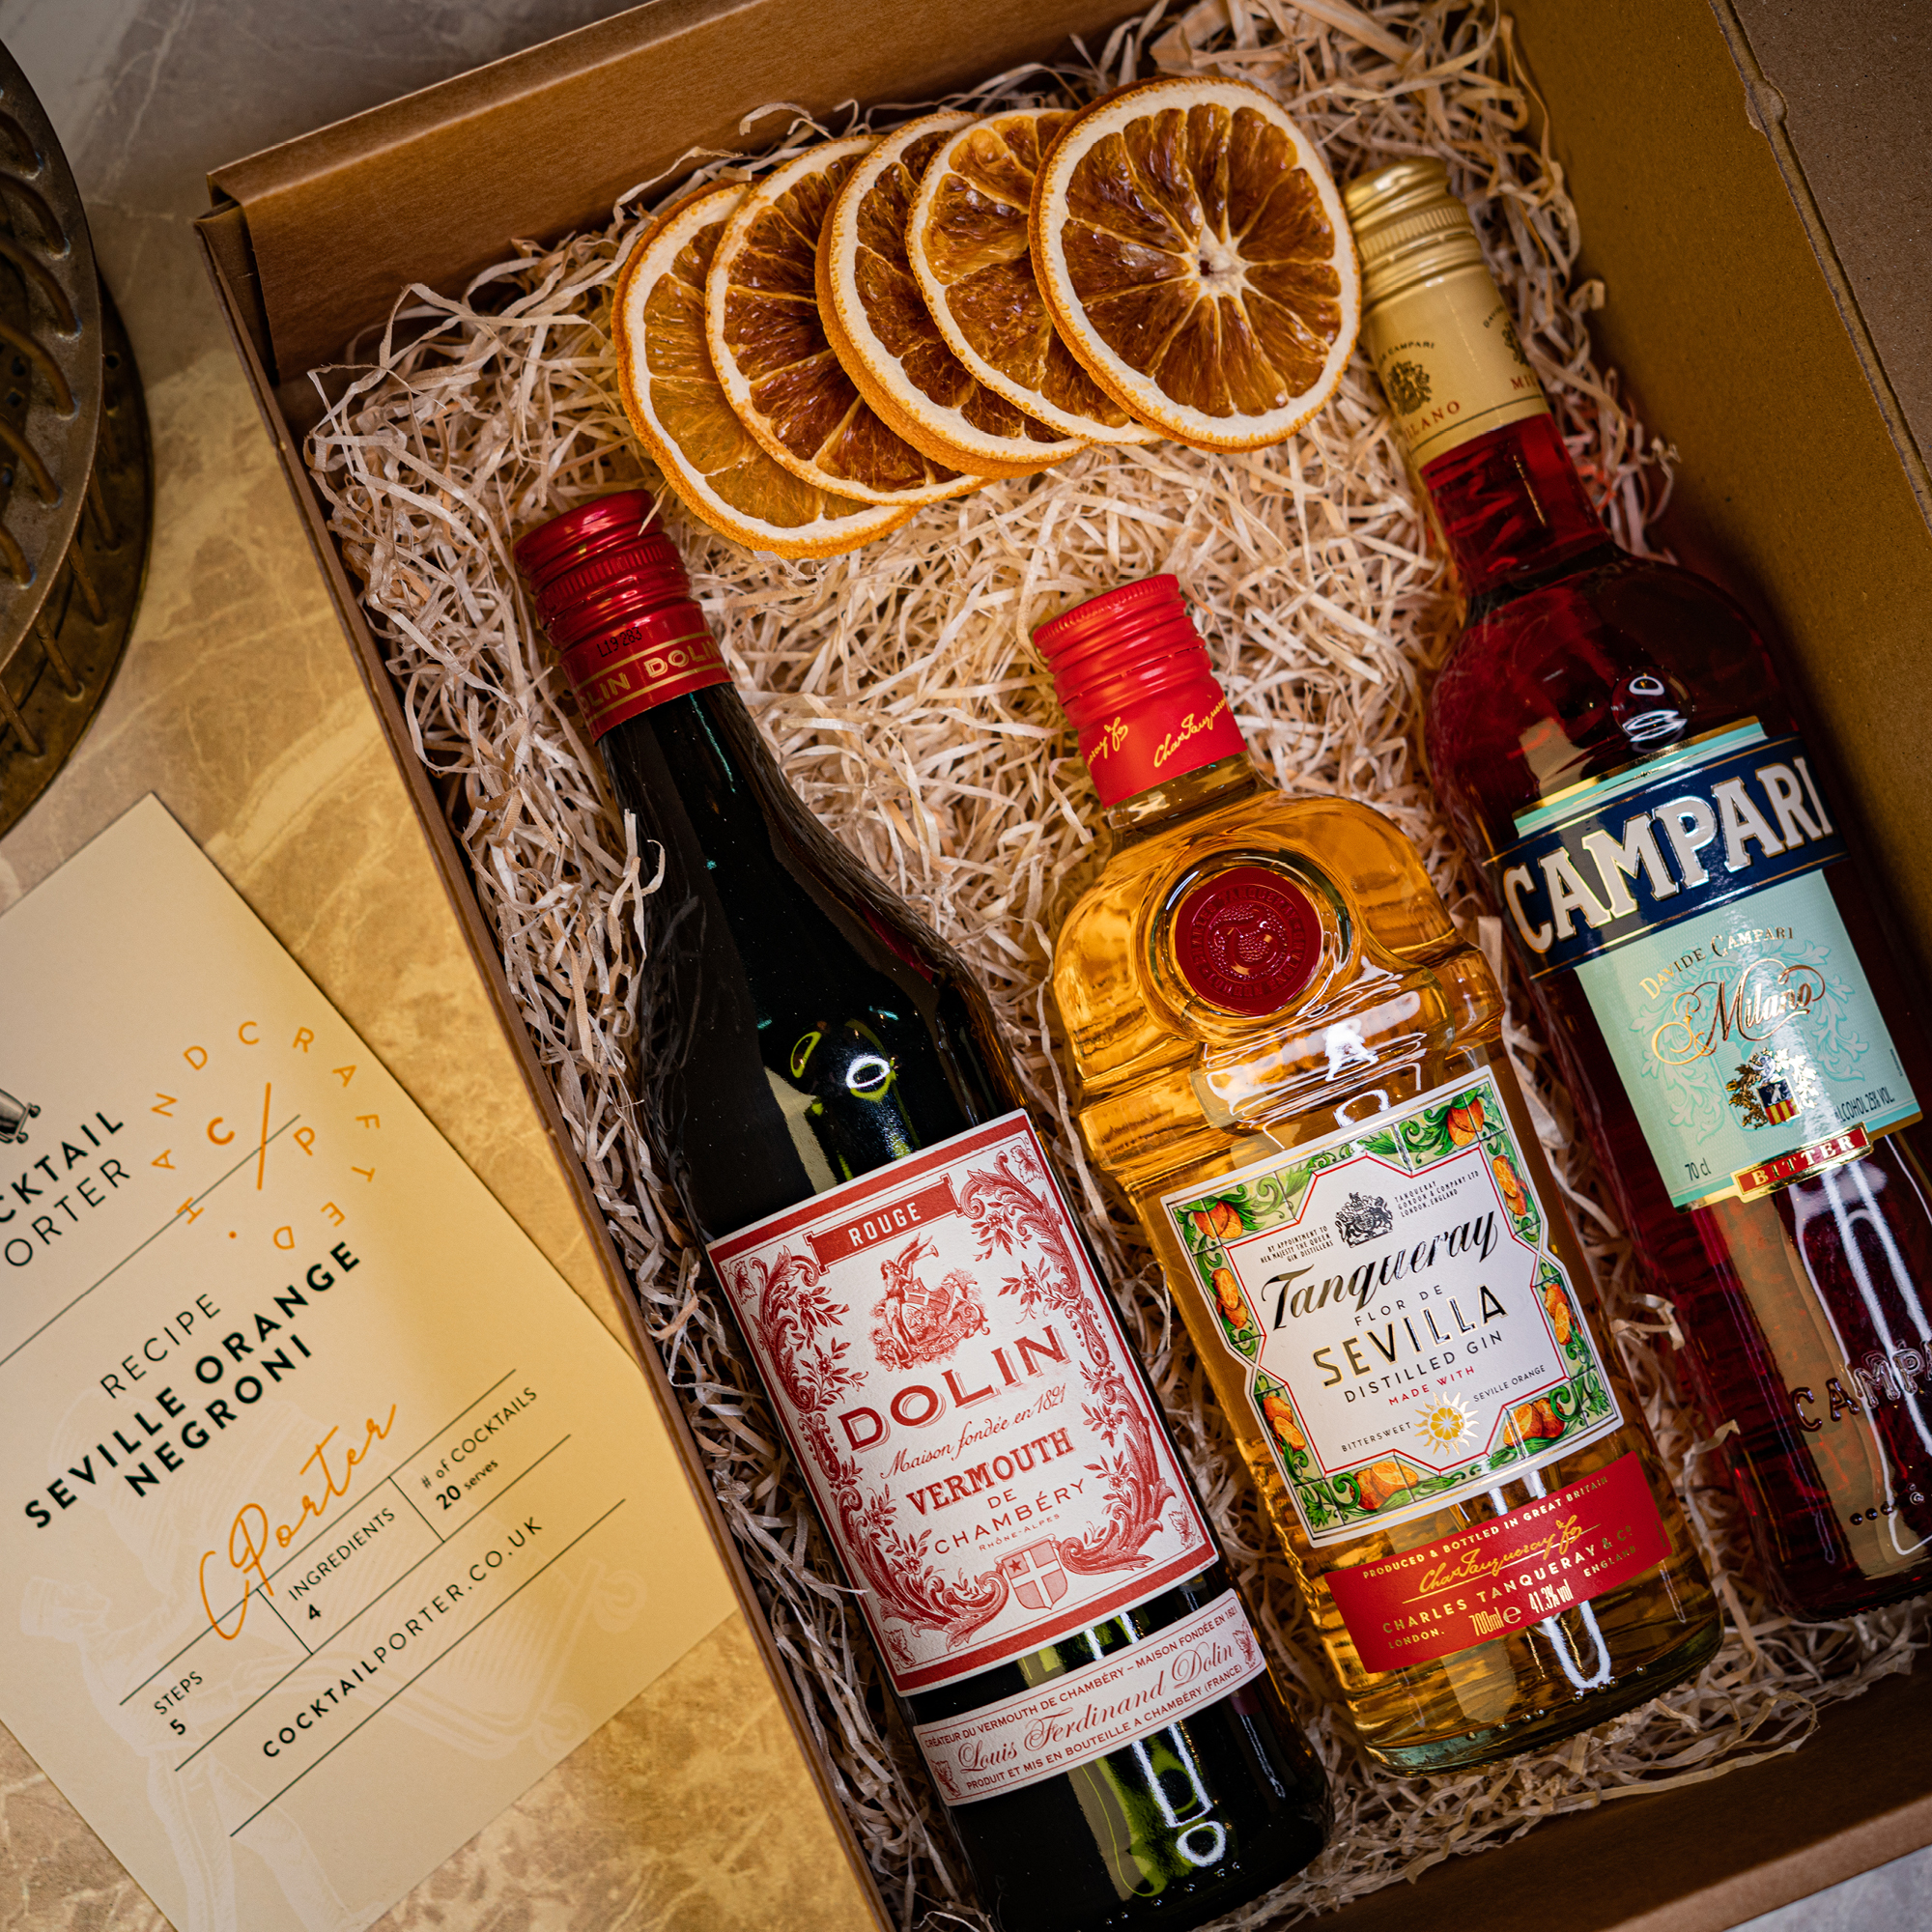 Cocktail Porter's full-size Seville orange negroni box complete with Tanqueray Flor de Sevilla, Campari, sweet vermouth and oranges